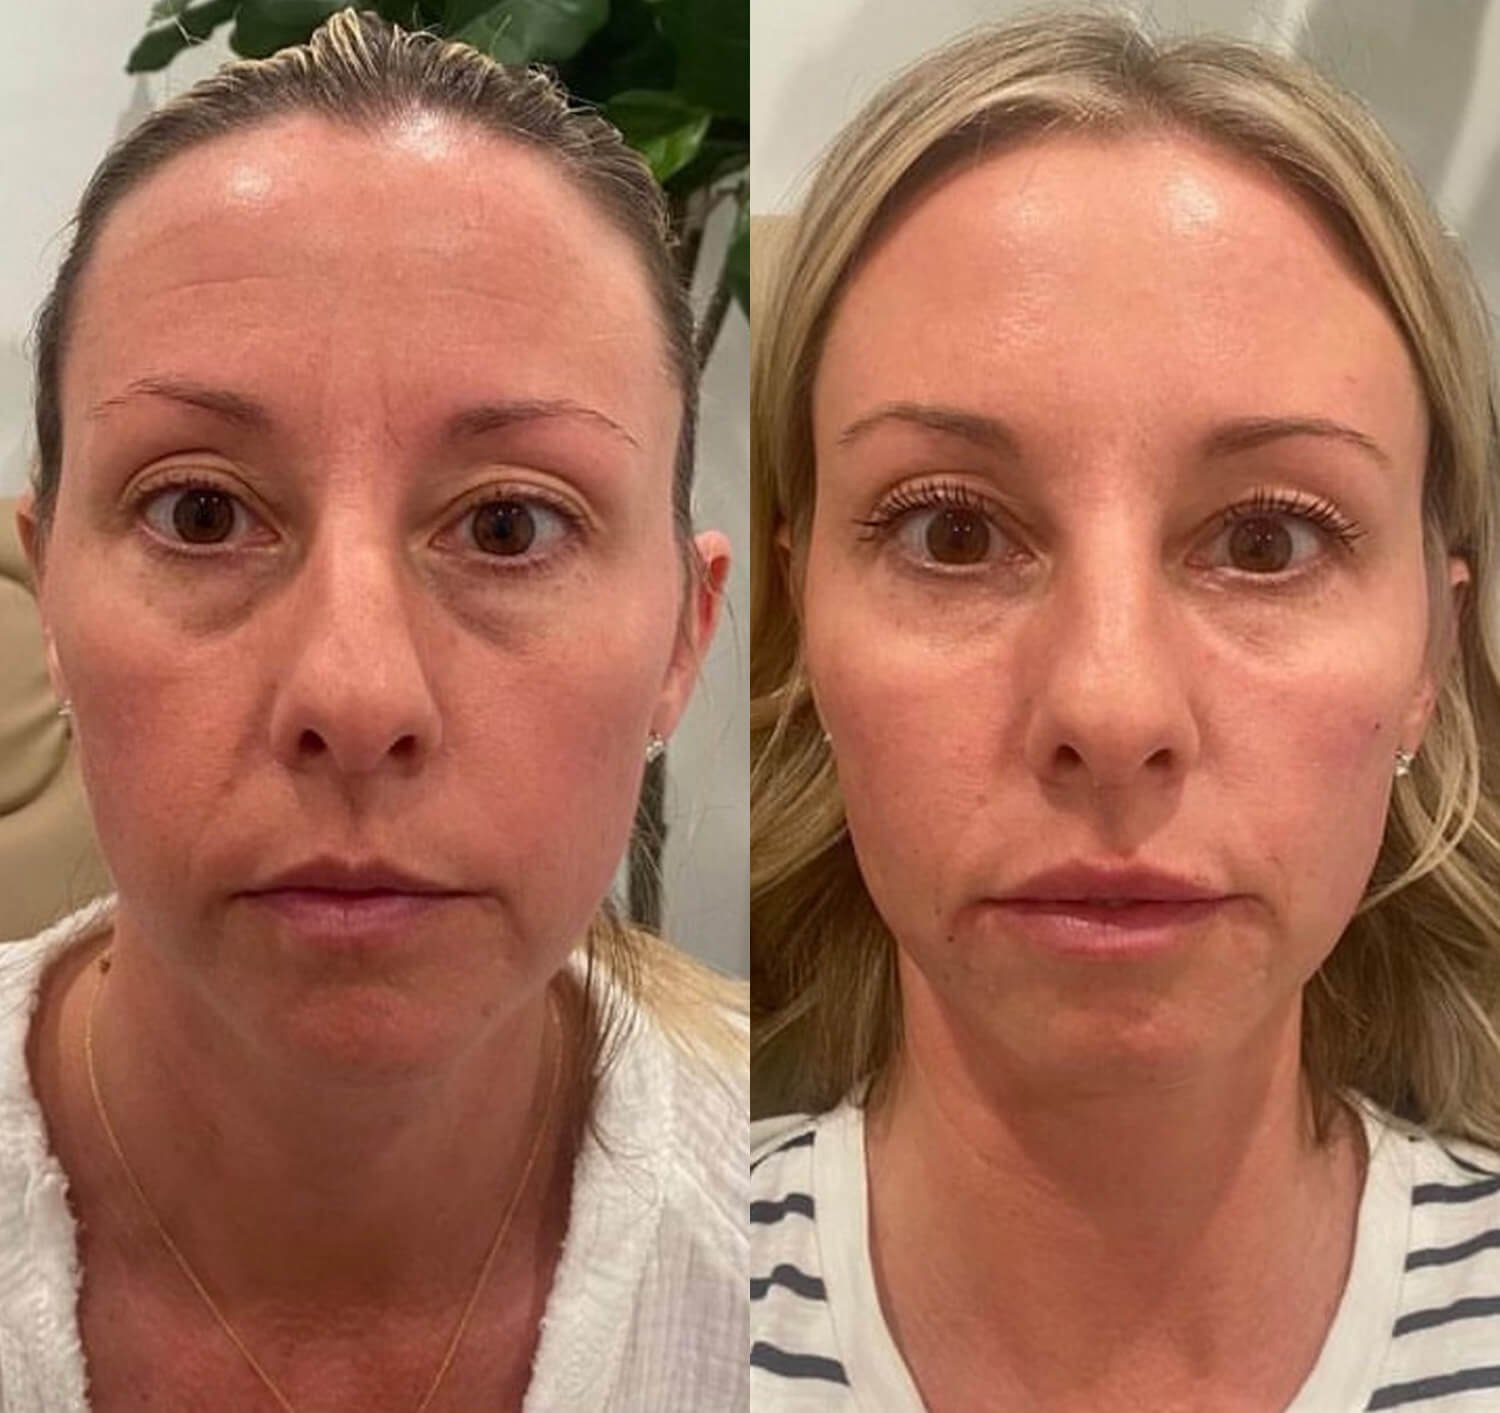 NIcole Dowler botox under eyes before and after.jpg